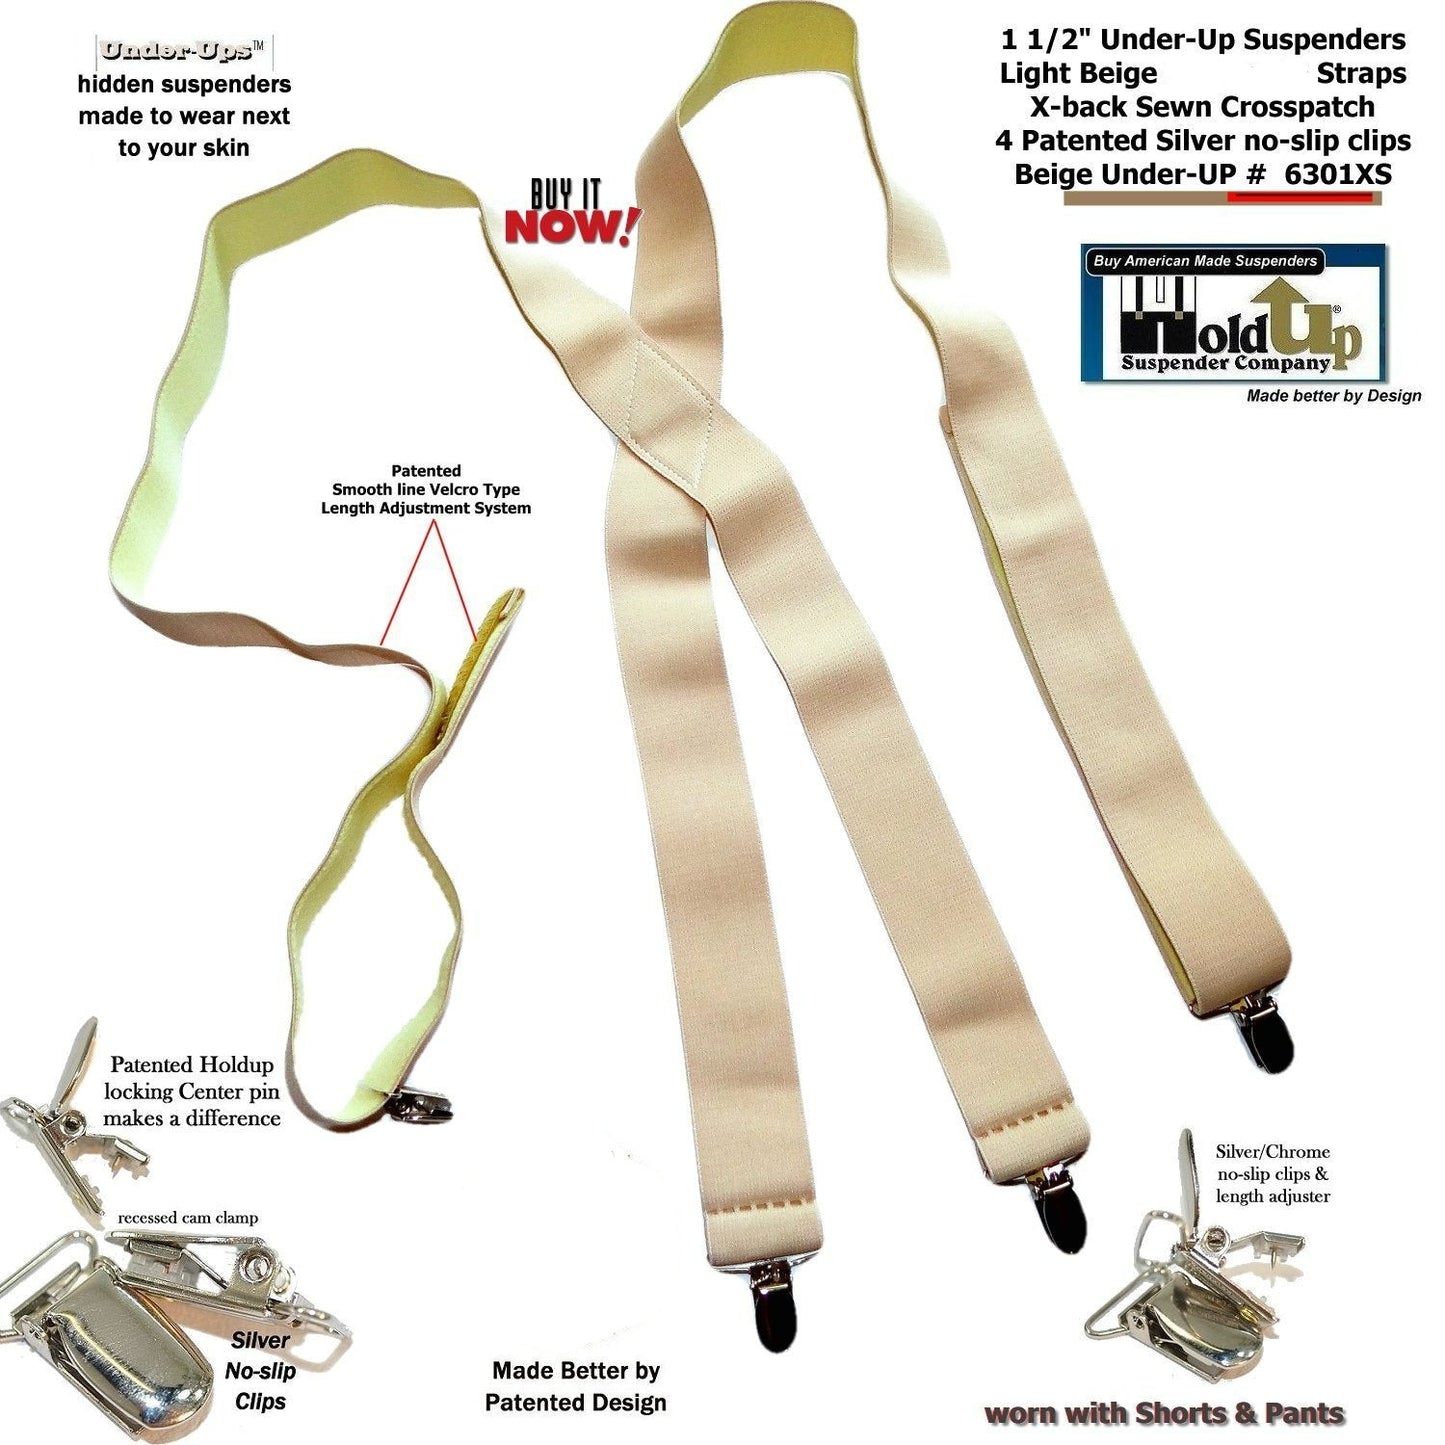 Hold-Ups 1 1/2" Wide Hidden Undergarment Suspenders In X-back Style With USA patented No-slip Silver Clips